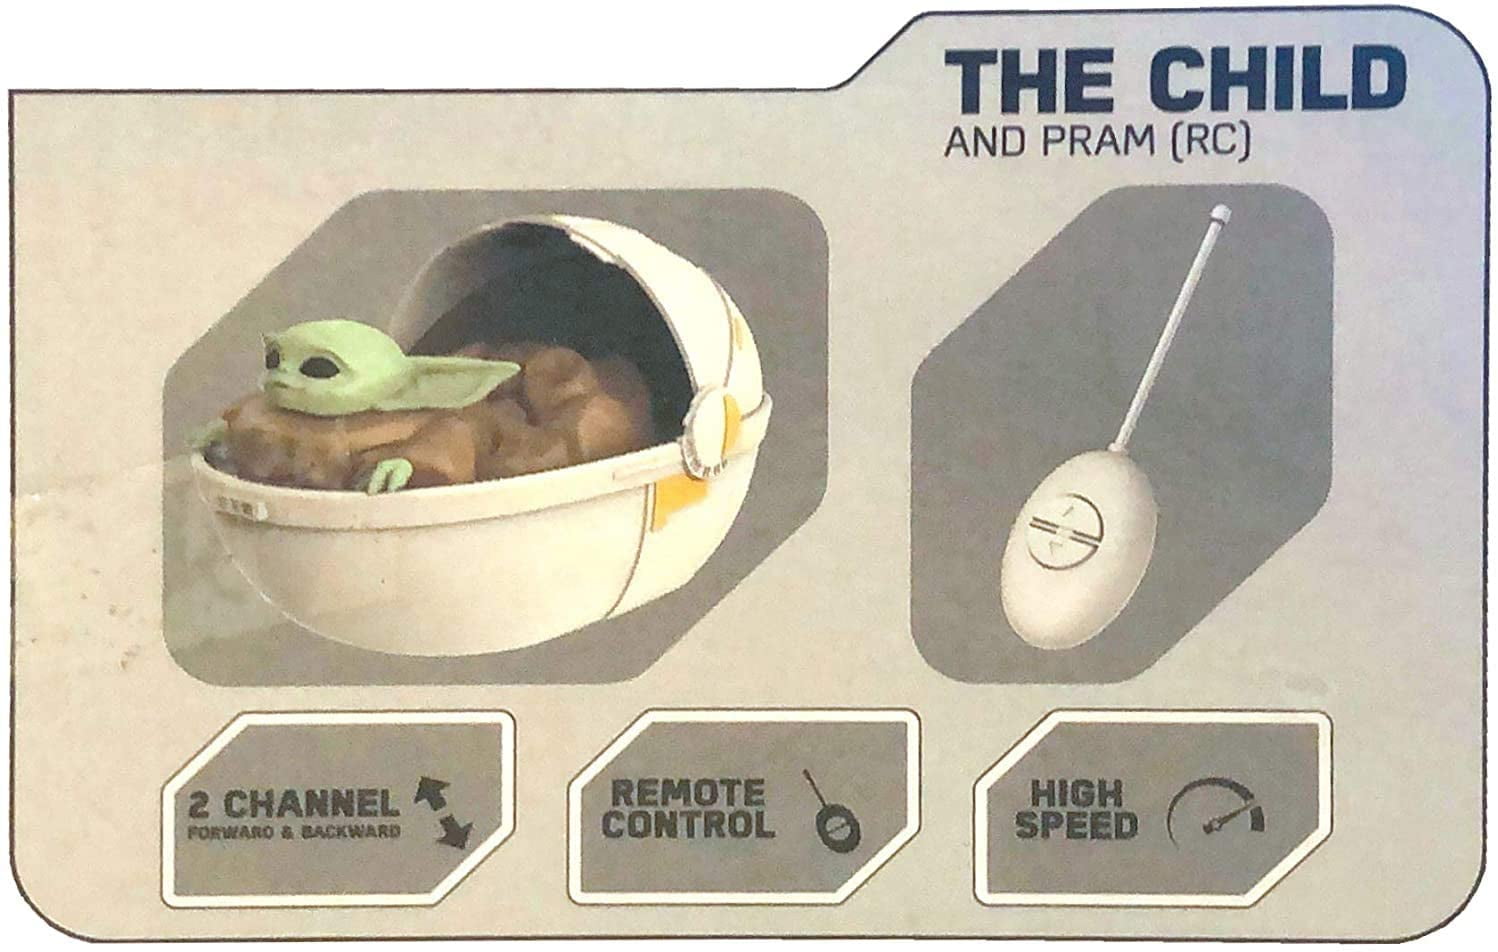 STAR WARS THE CHILD AND PRAM Hover Pod Carrier Baby Yoda RC Remote Controlled 